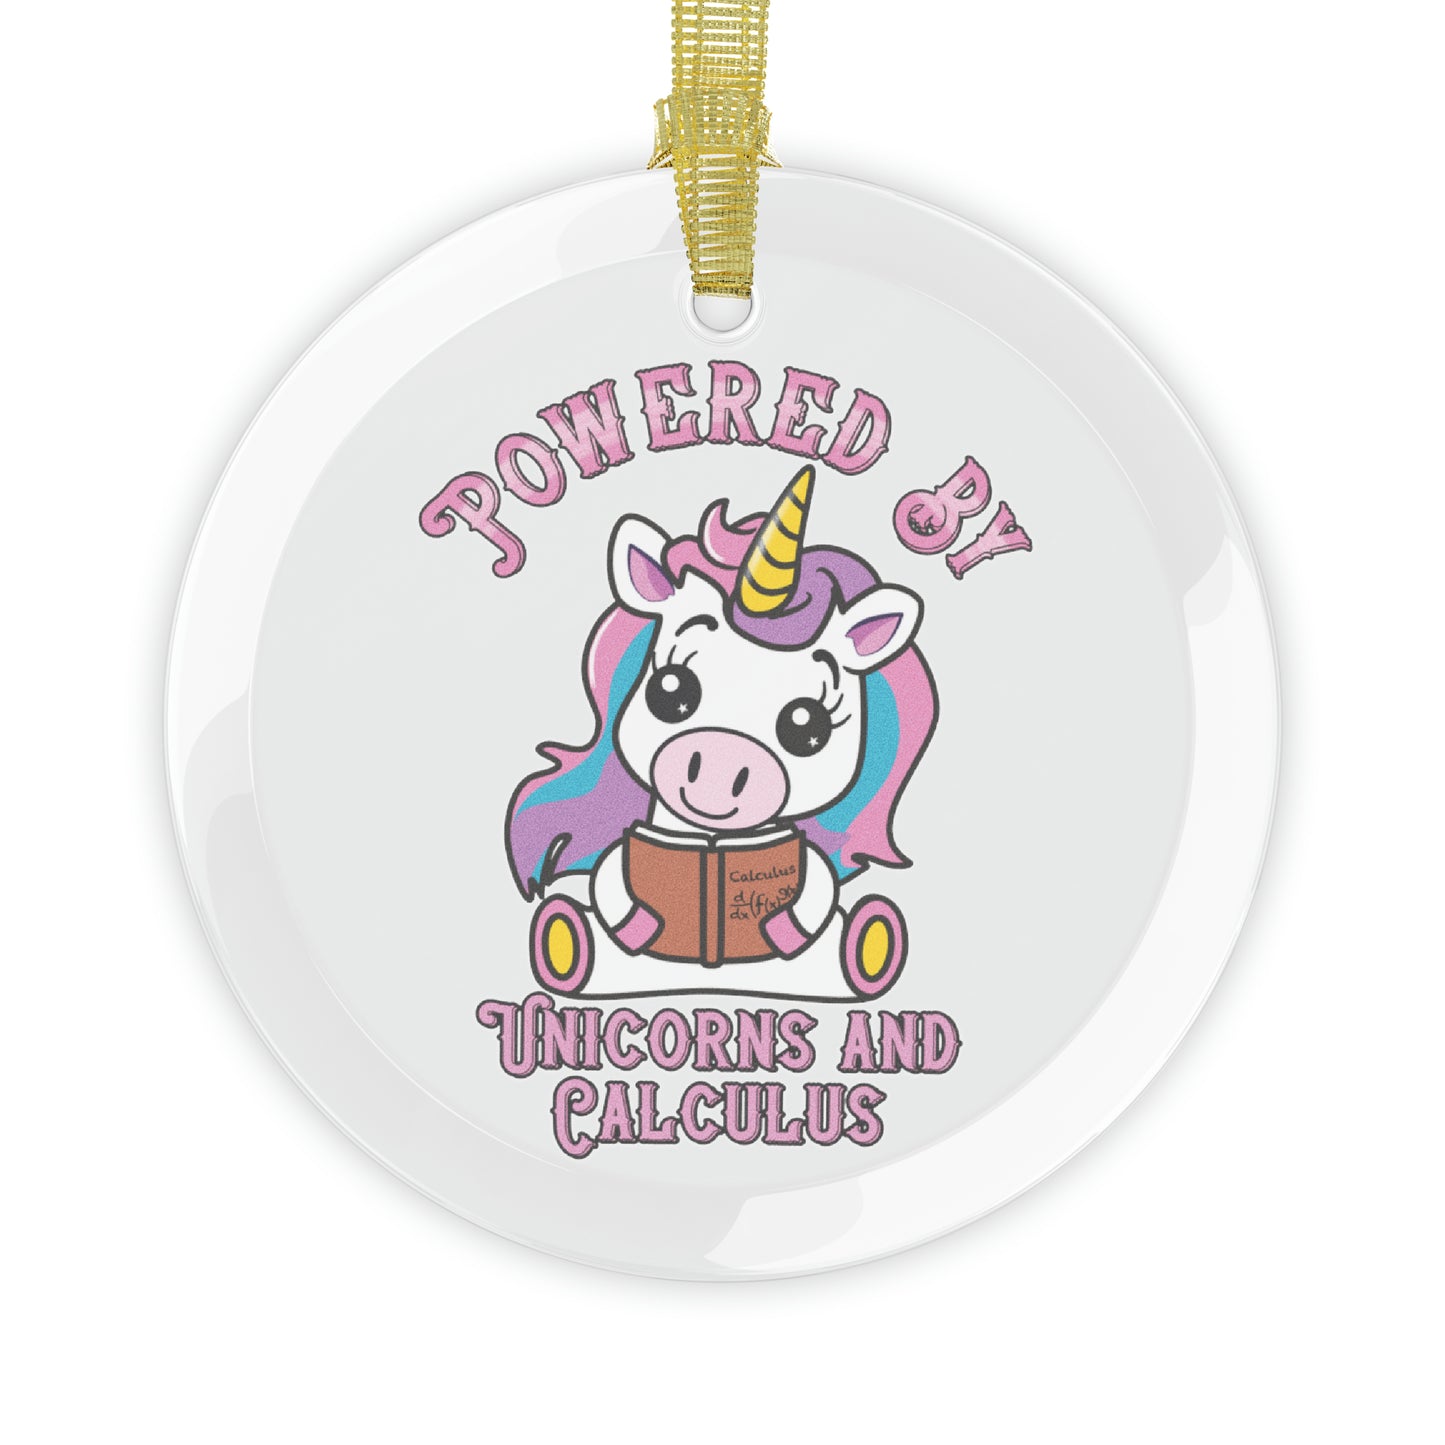 Powered by Unicorns and Calculus Glass Ornaments